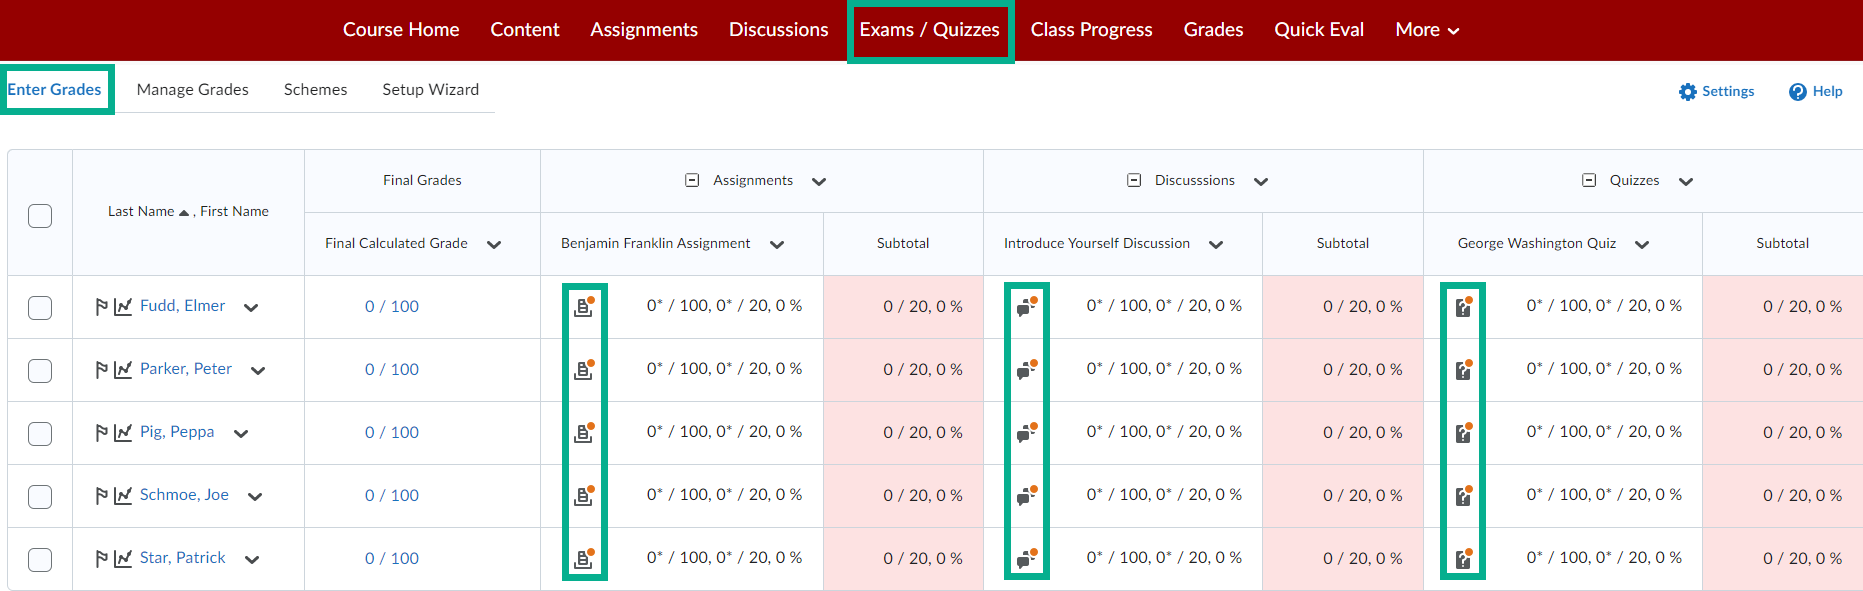 Image of the enter grades tab showing unread submissions for assignments, discussions, and exams/quizzes